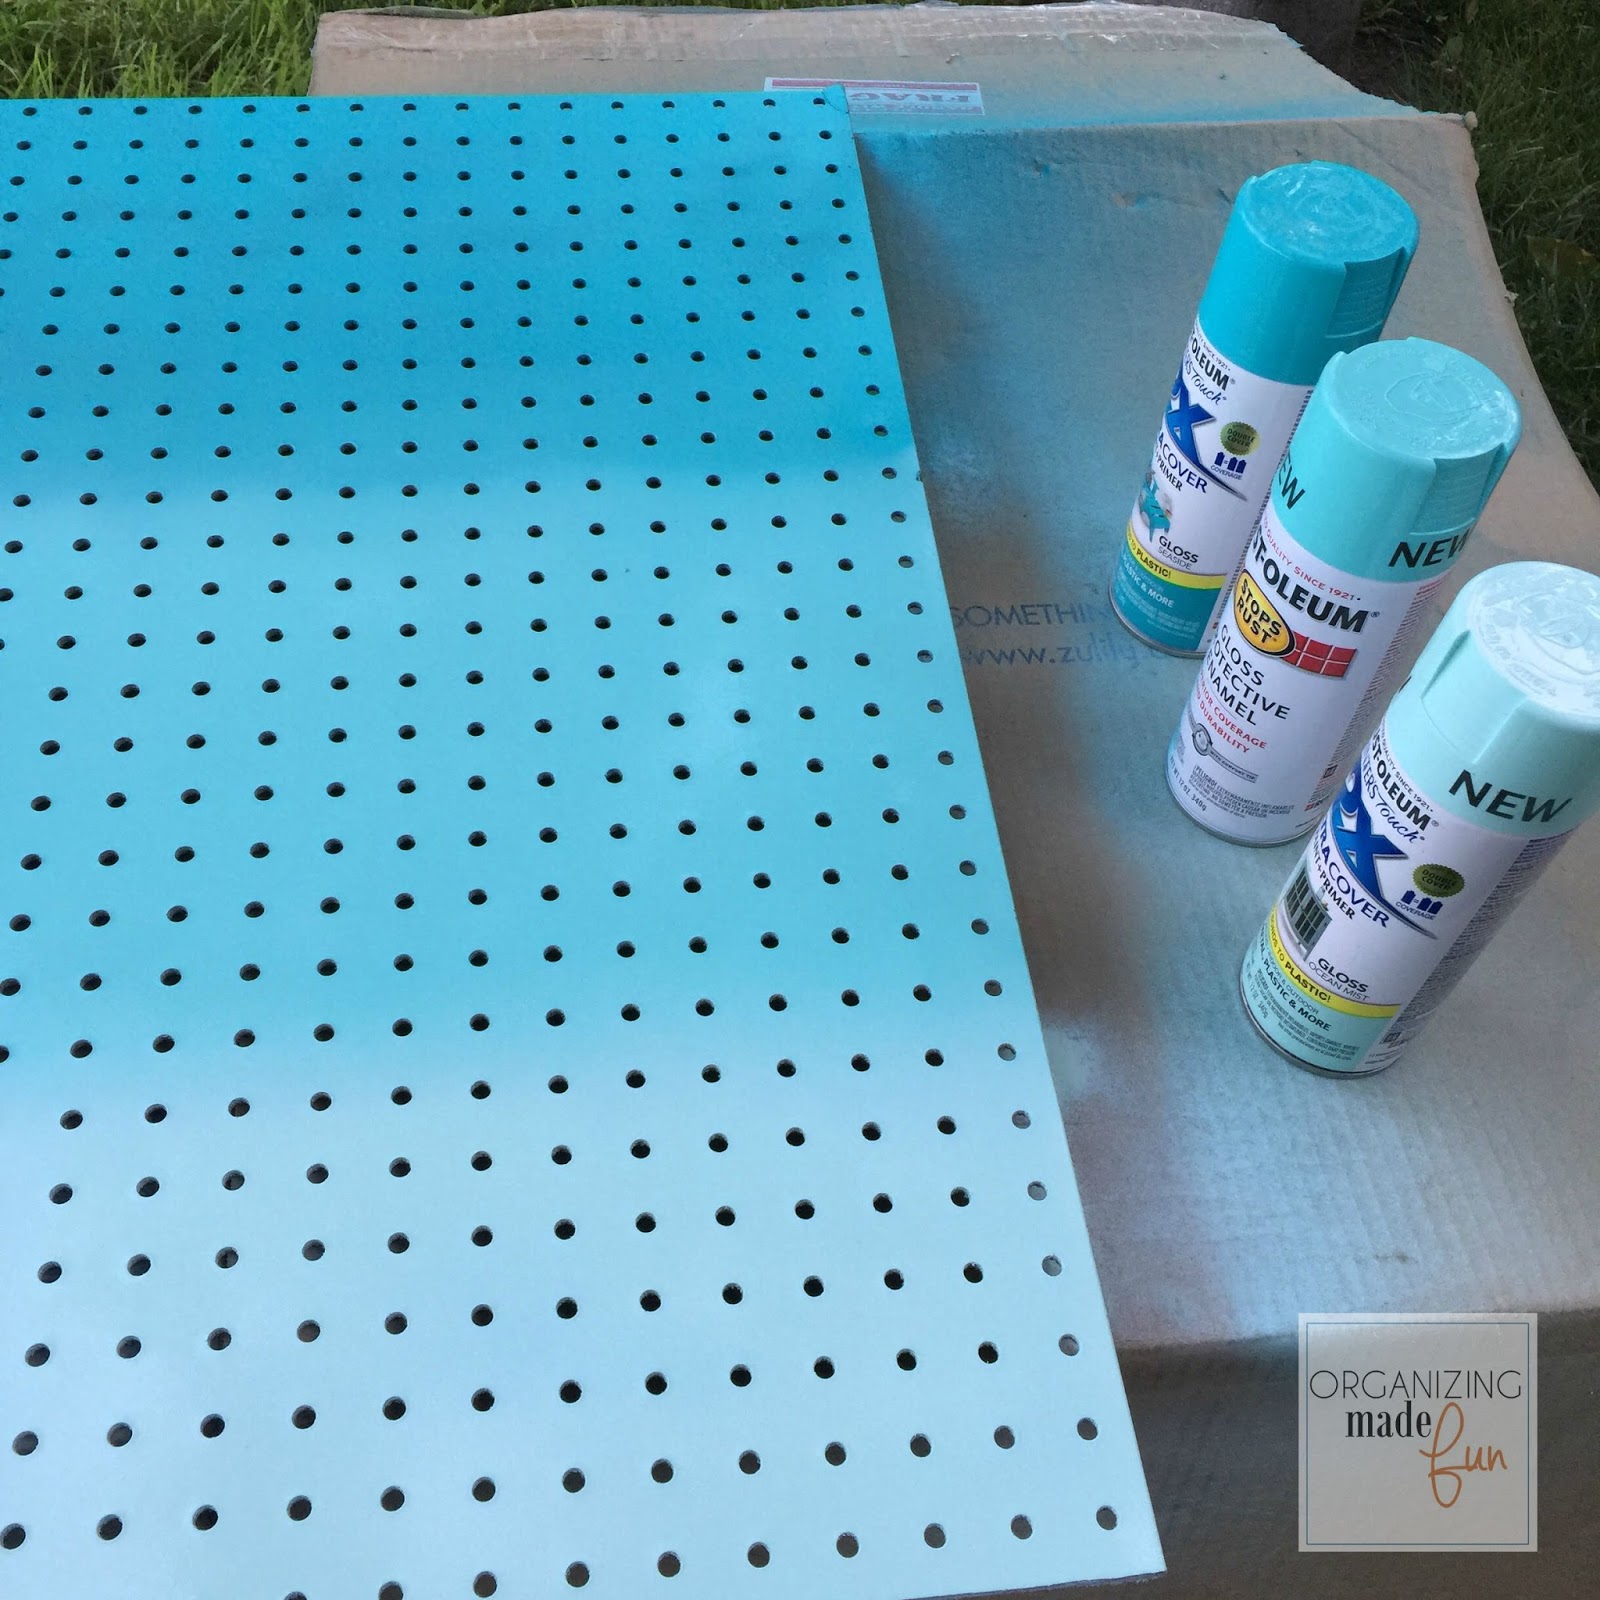 Organizing Made Fun: How to Hide Messy Cords with Pegboard